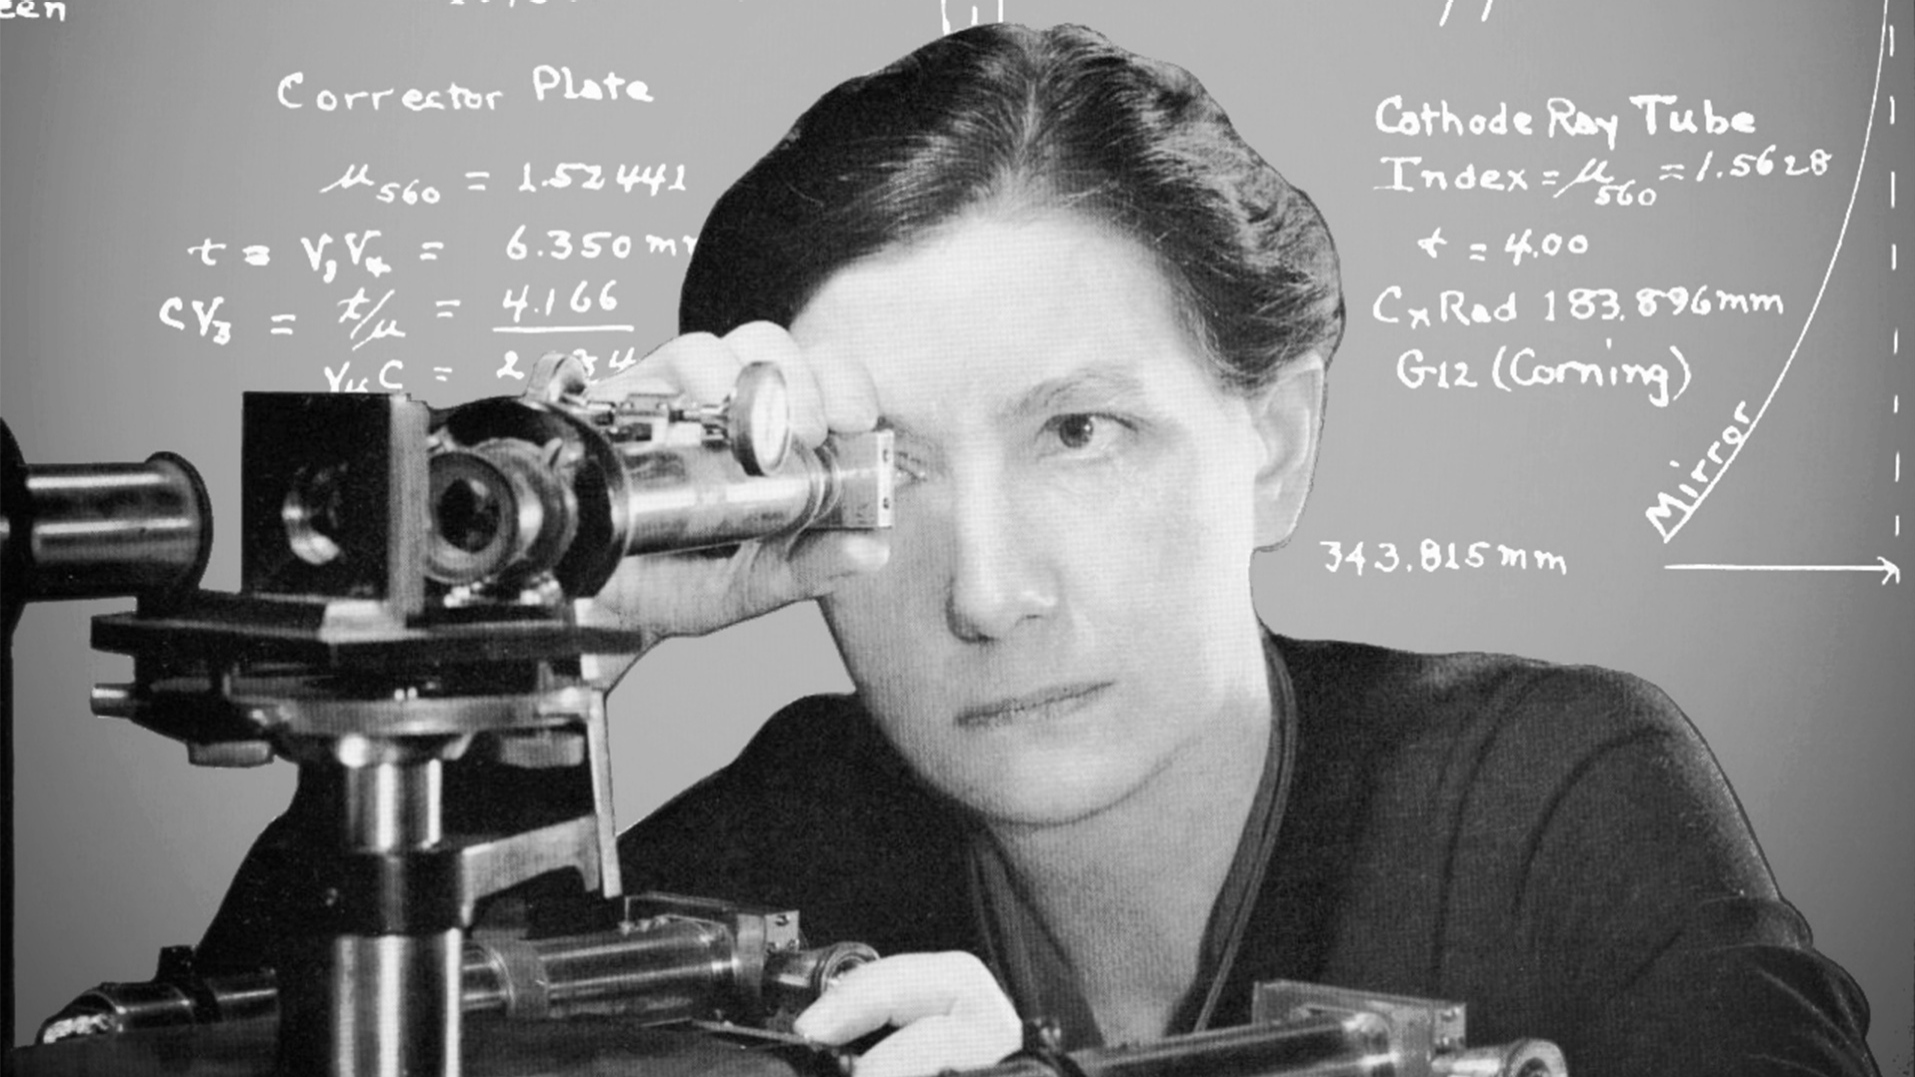 A 1930 magazine cover showing a woman (Dr. Anna Estelle Glancy) looking through a microscope. The headline reads: A. Estelle Glancy Ph.D., Research Scientist and Lens Designer